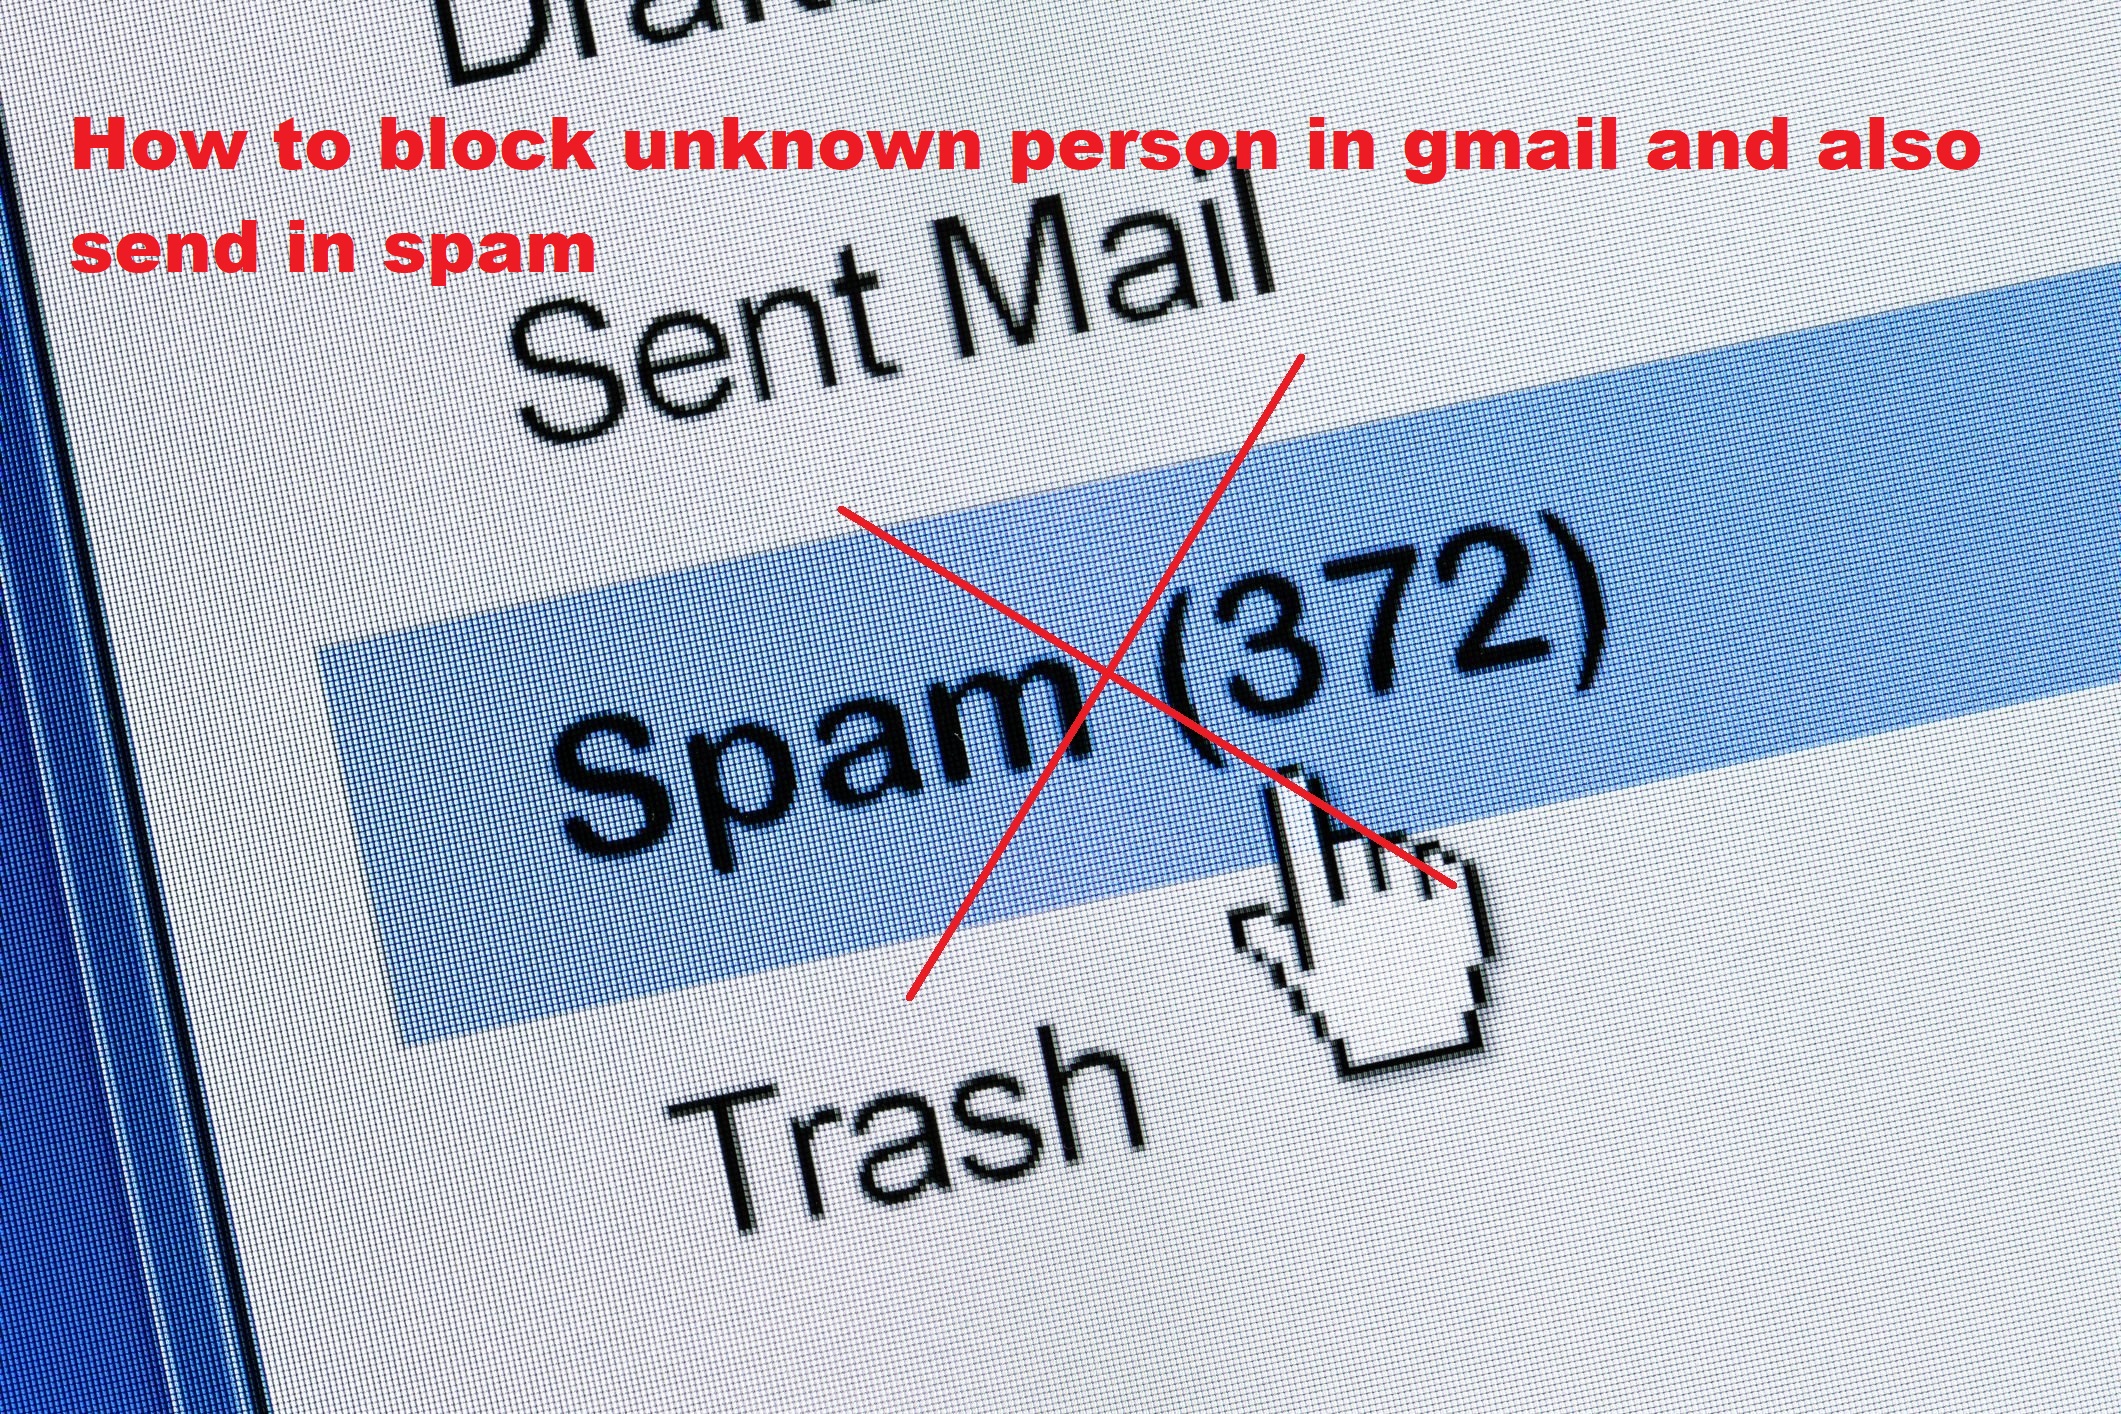 How to block unknown person in gmail and also send in spam